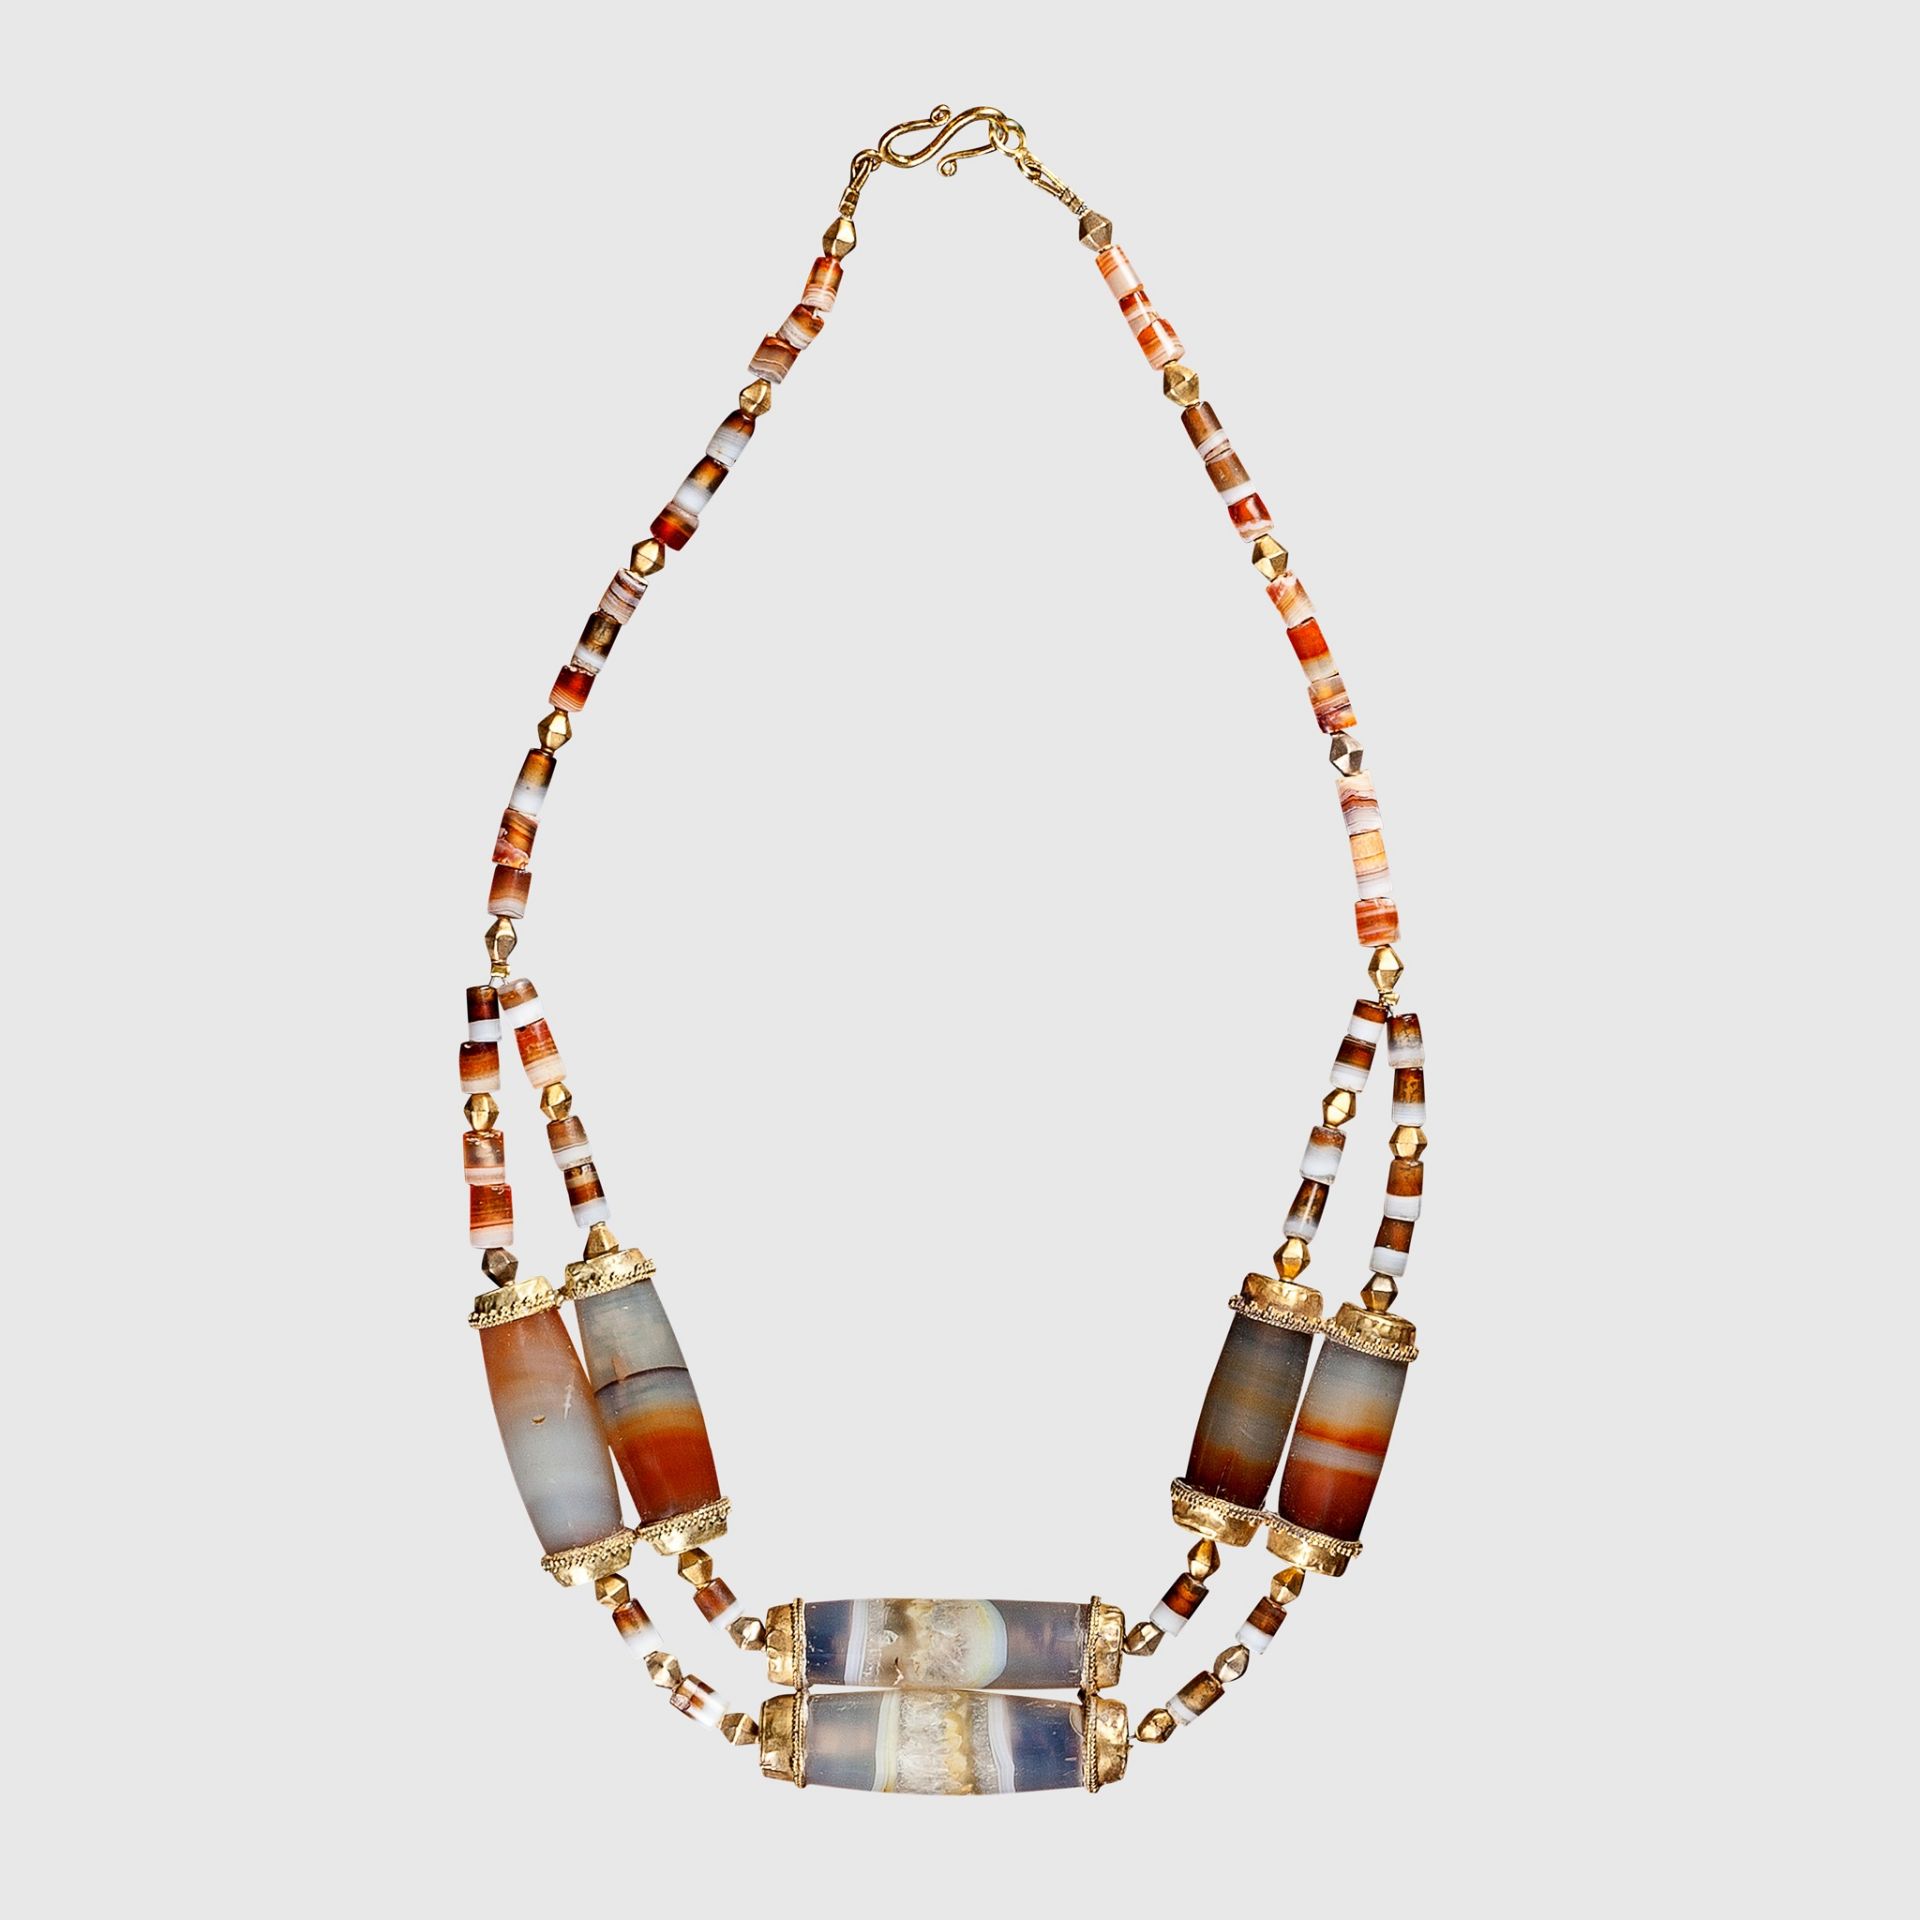 WESTERN ASIATIC BANDED AGATE AND GOLD BEAD NECKLACE NEAR EAST, 1ST MILLENNIUM B.C.